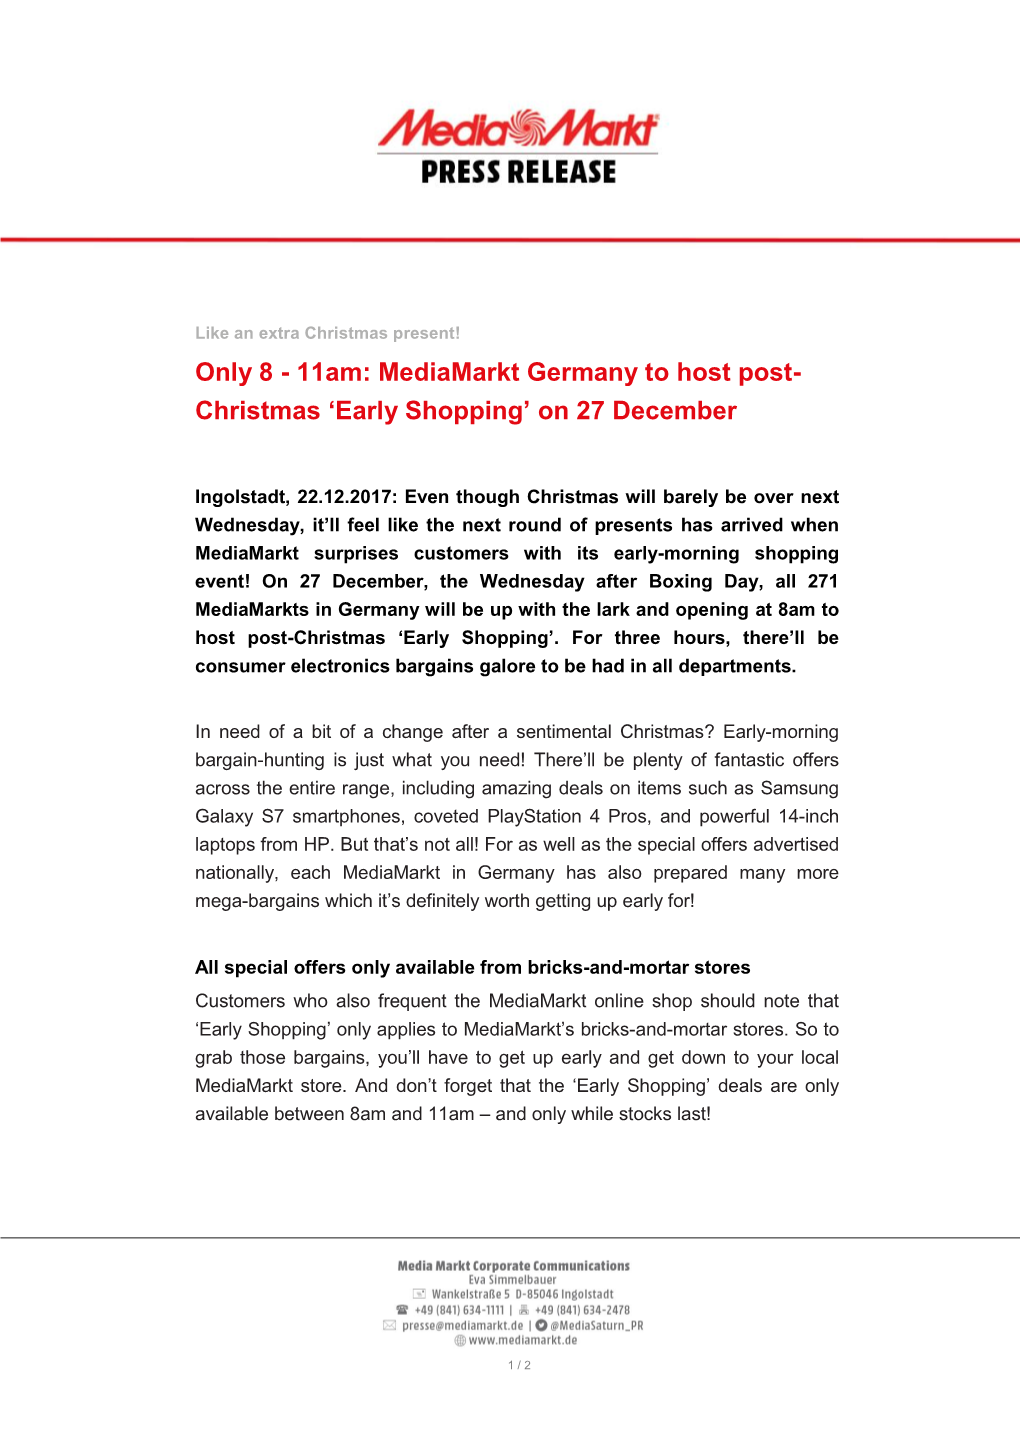 Only 8 - 11Am: Mediamarkt Germany to Host Post- Christmas ‘Early Shopping’ on 27 December